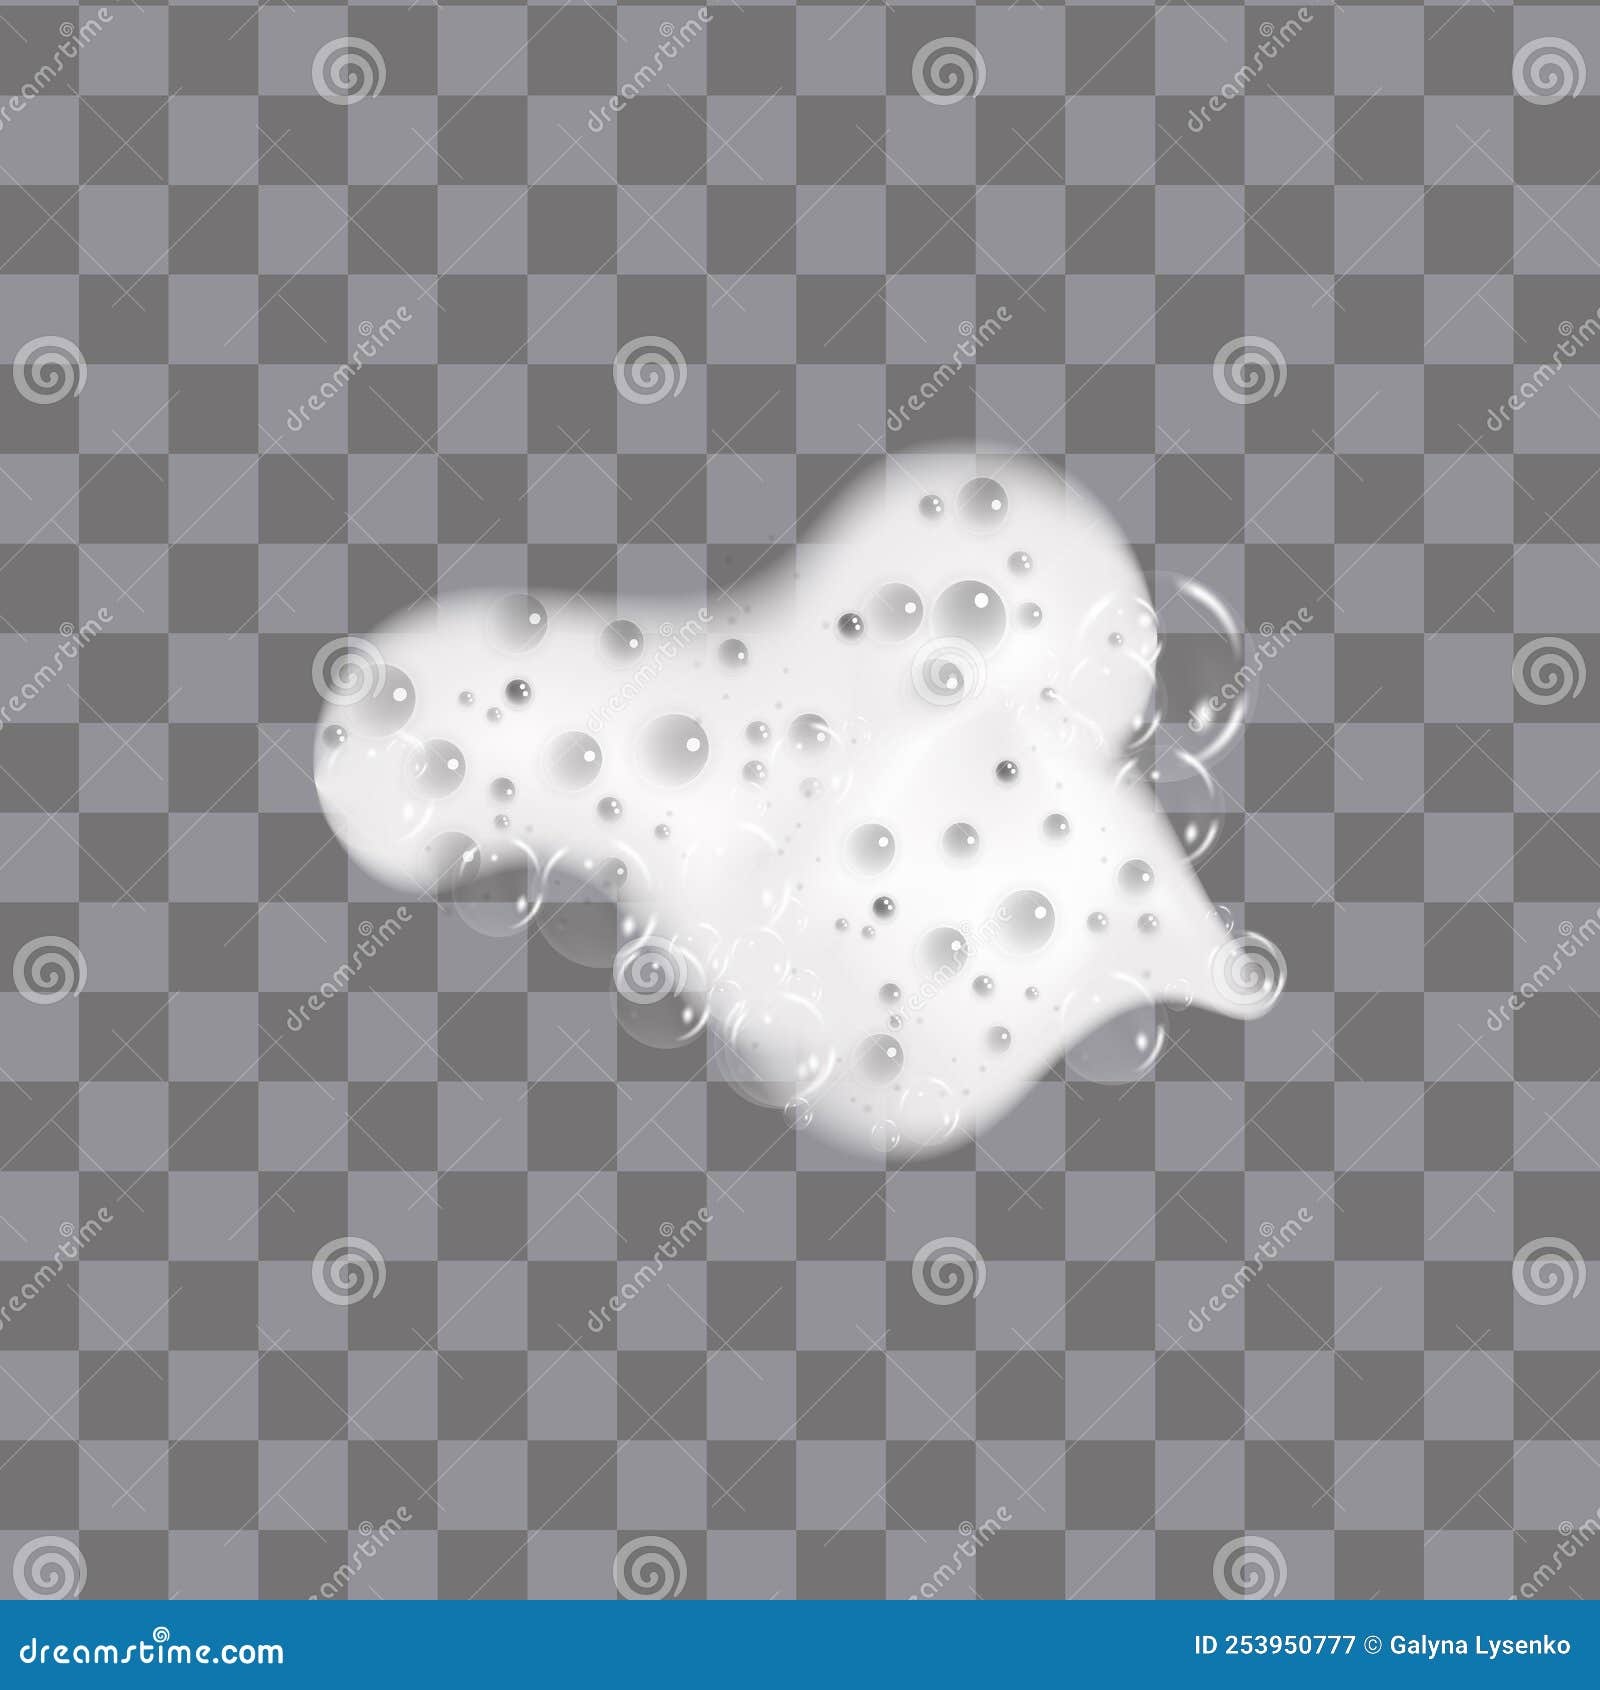 https://thumbs.dreamstime.com/z/bath-foam-isolated-transparent-background-shampoo-bubbles-texture-sparkling-lather-vector-illustration-253950777.jpg